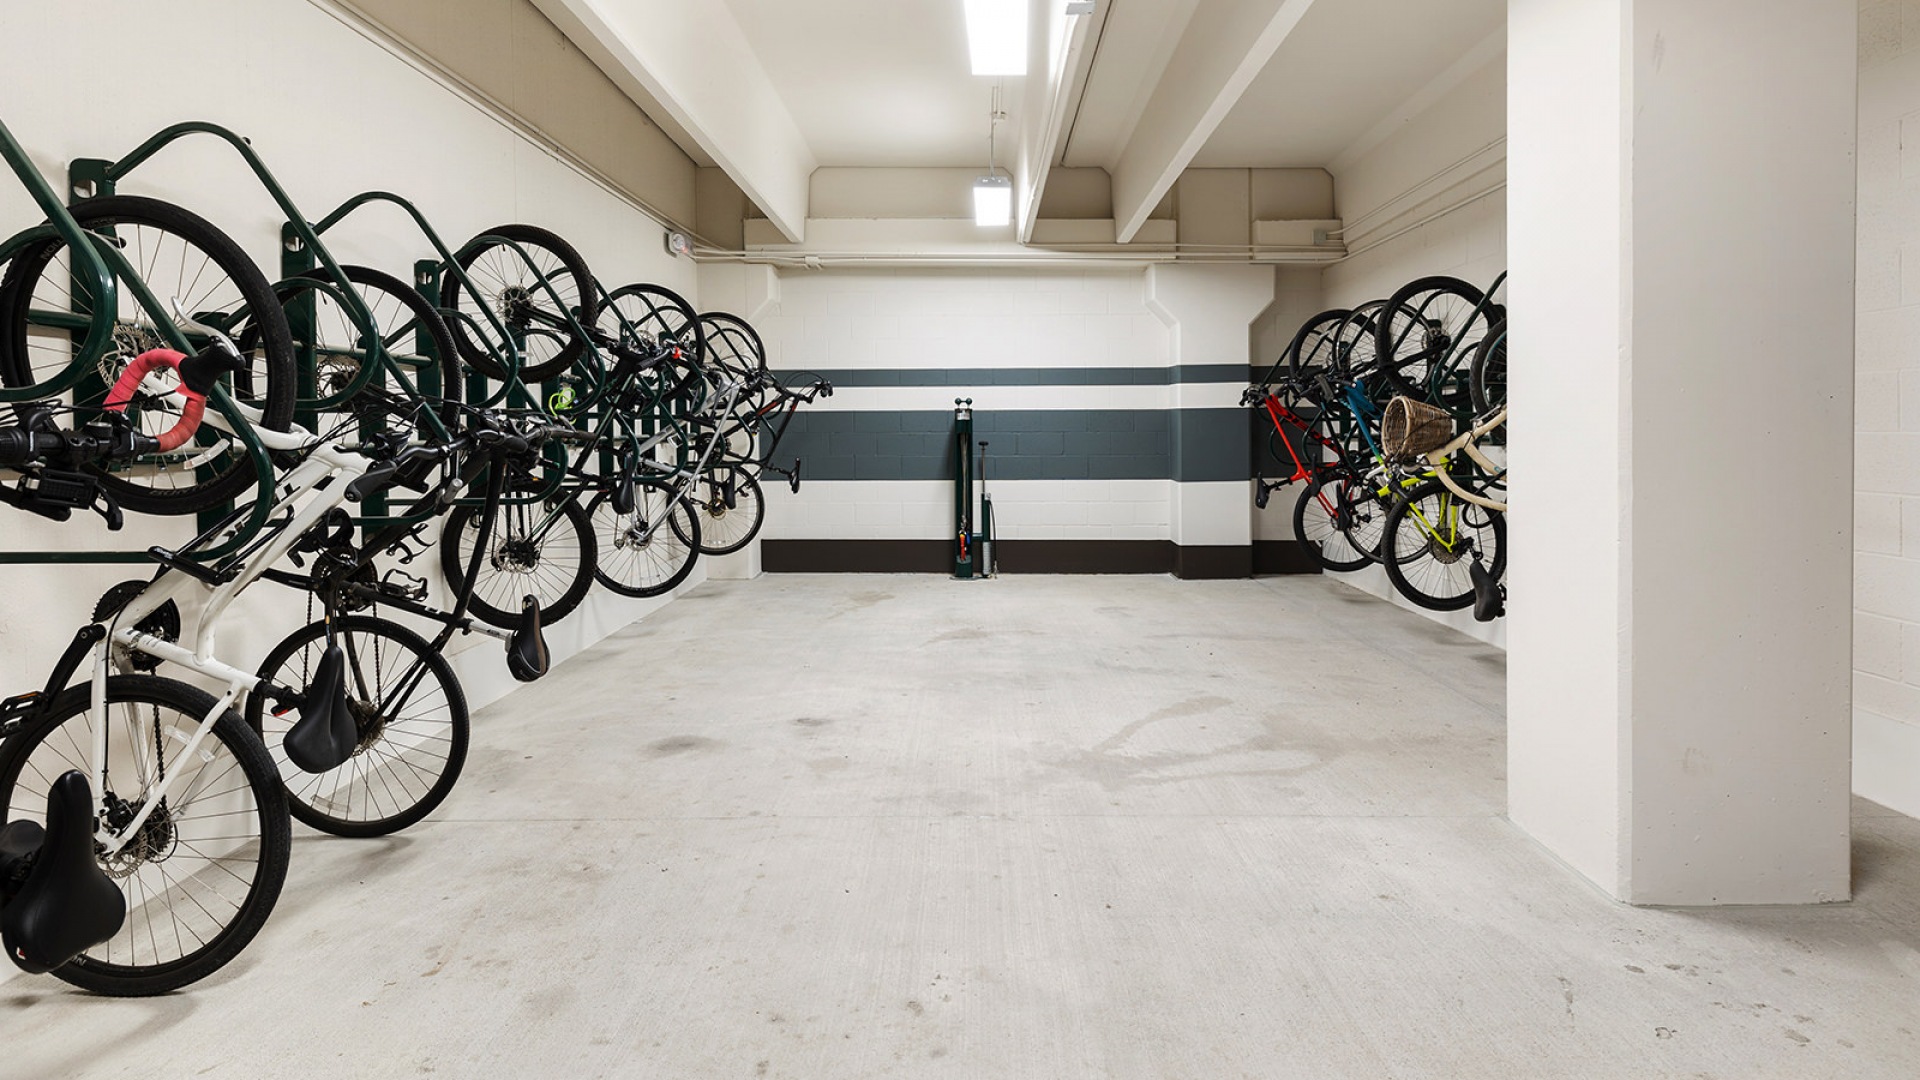 The bike storage room at our apartments in Houston, featuring bicycles hanging out racks mounted on the walls.